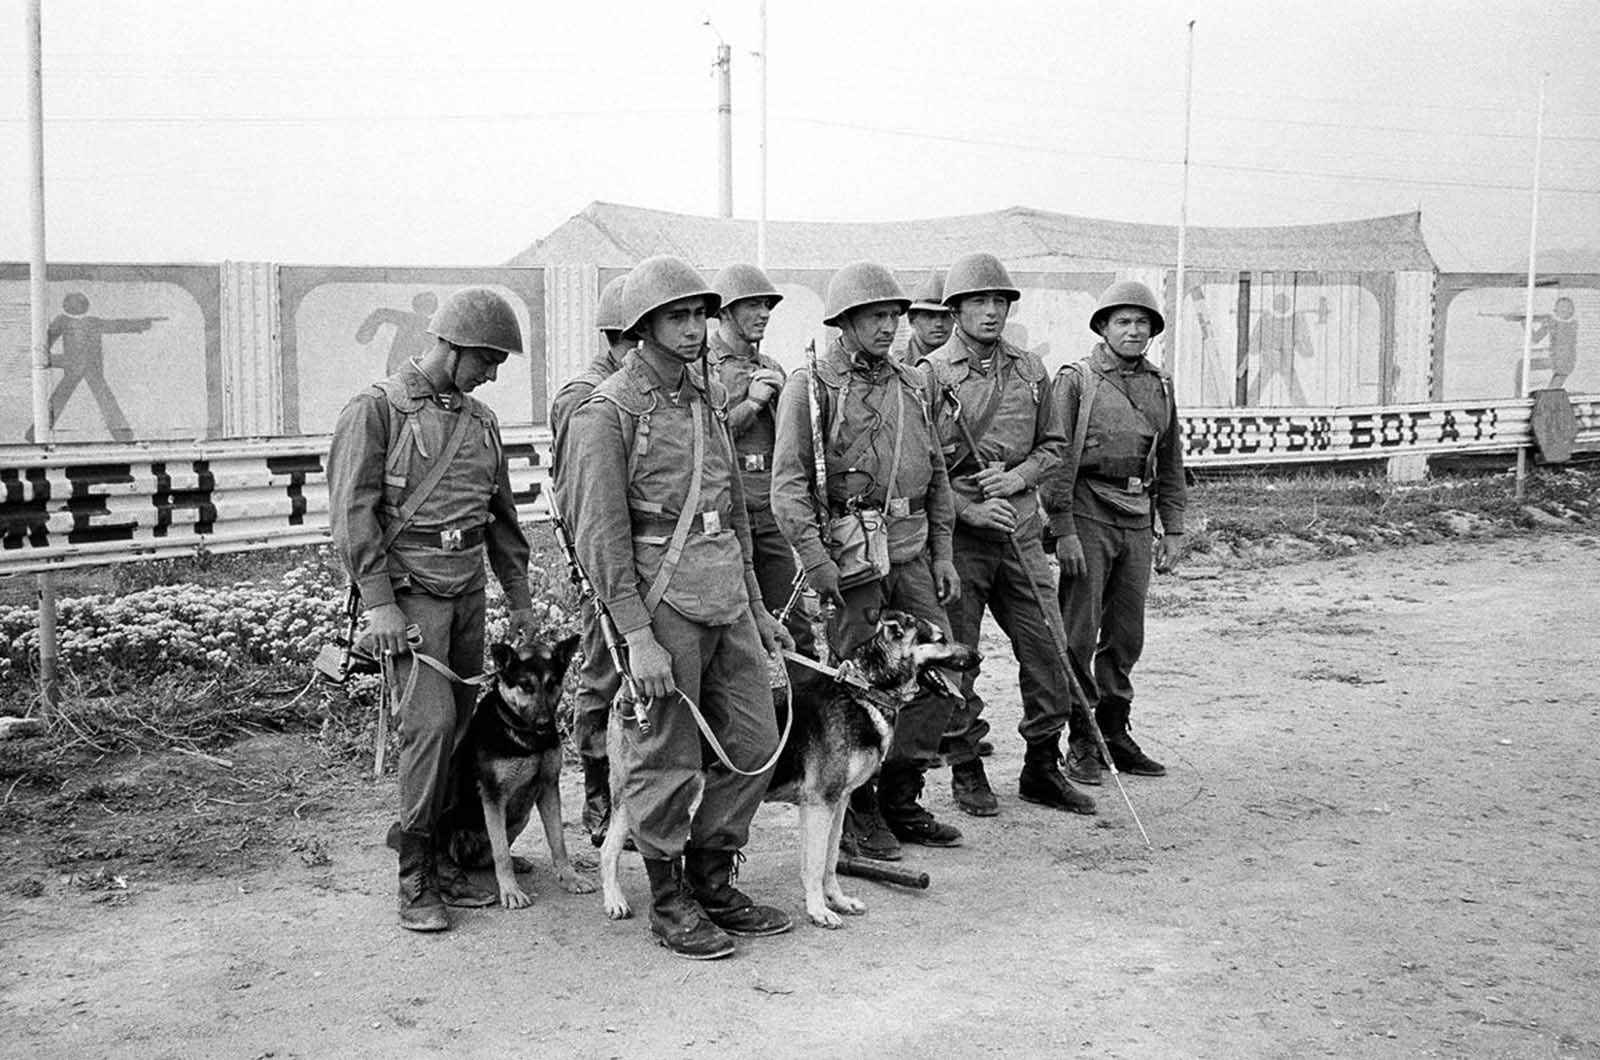 Soviet soldiers work with two German Shepherd dogs trained to sniff out explosives in and around their base near Kabul on May 1, 1988.